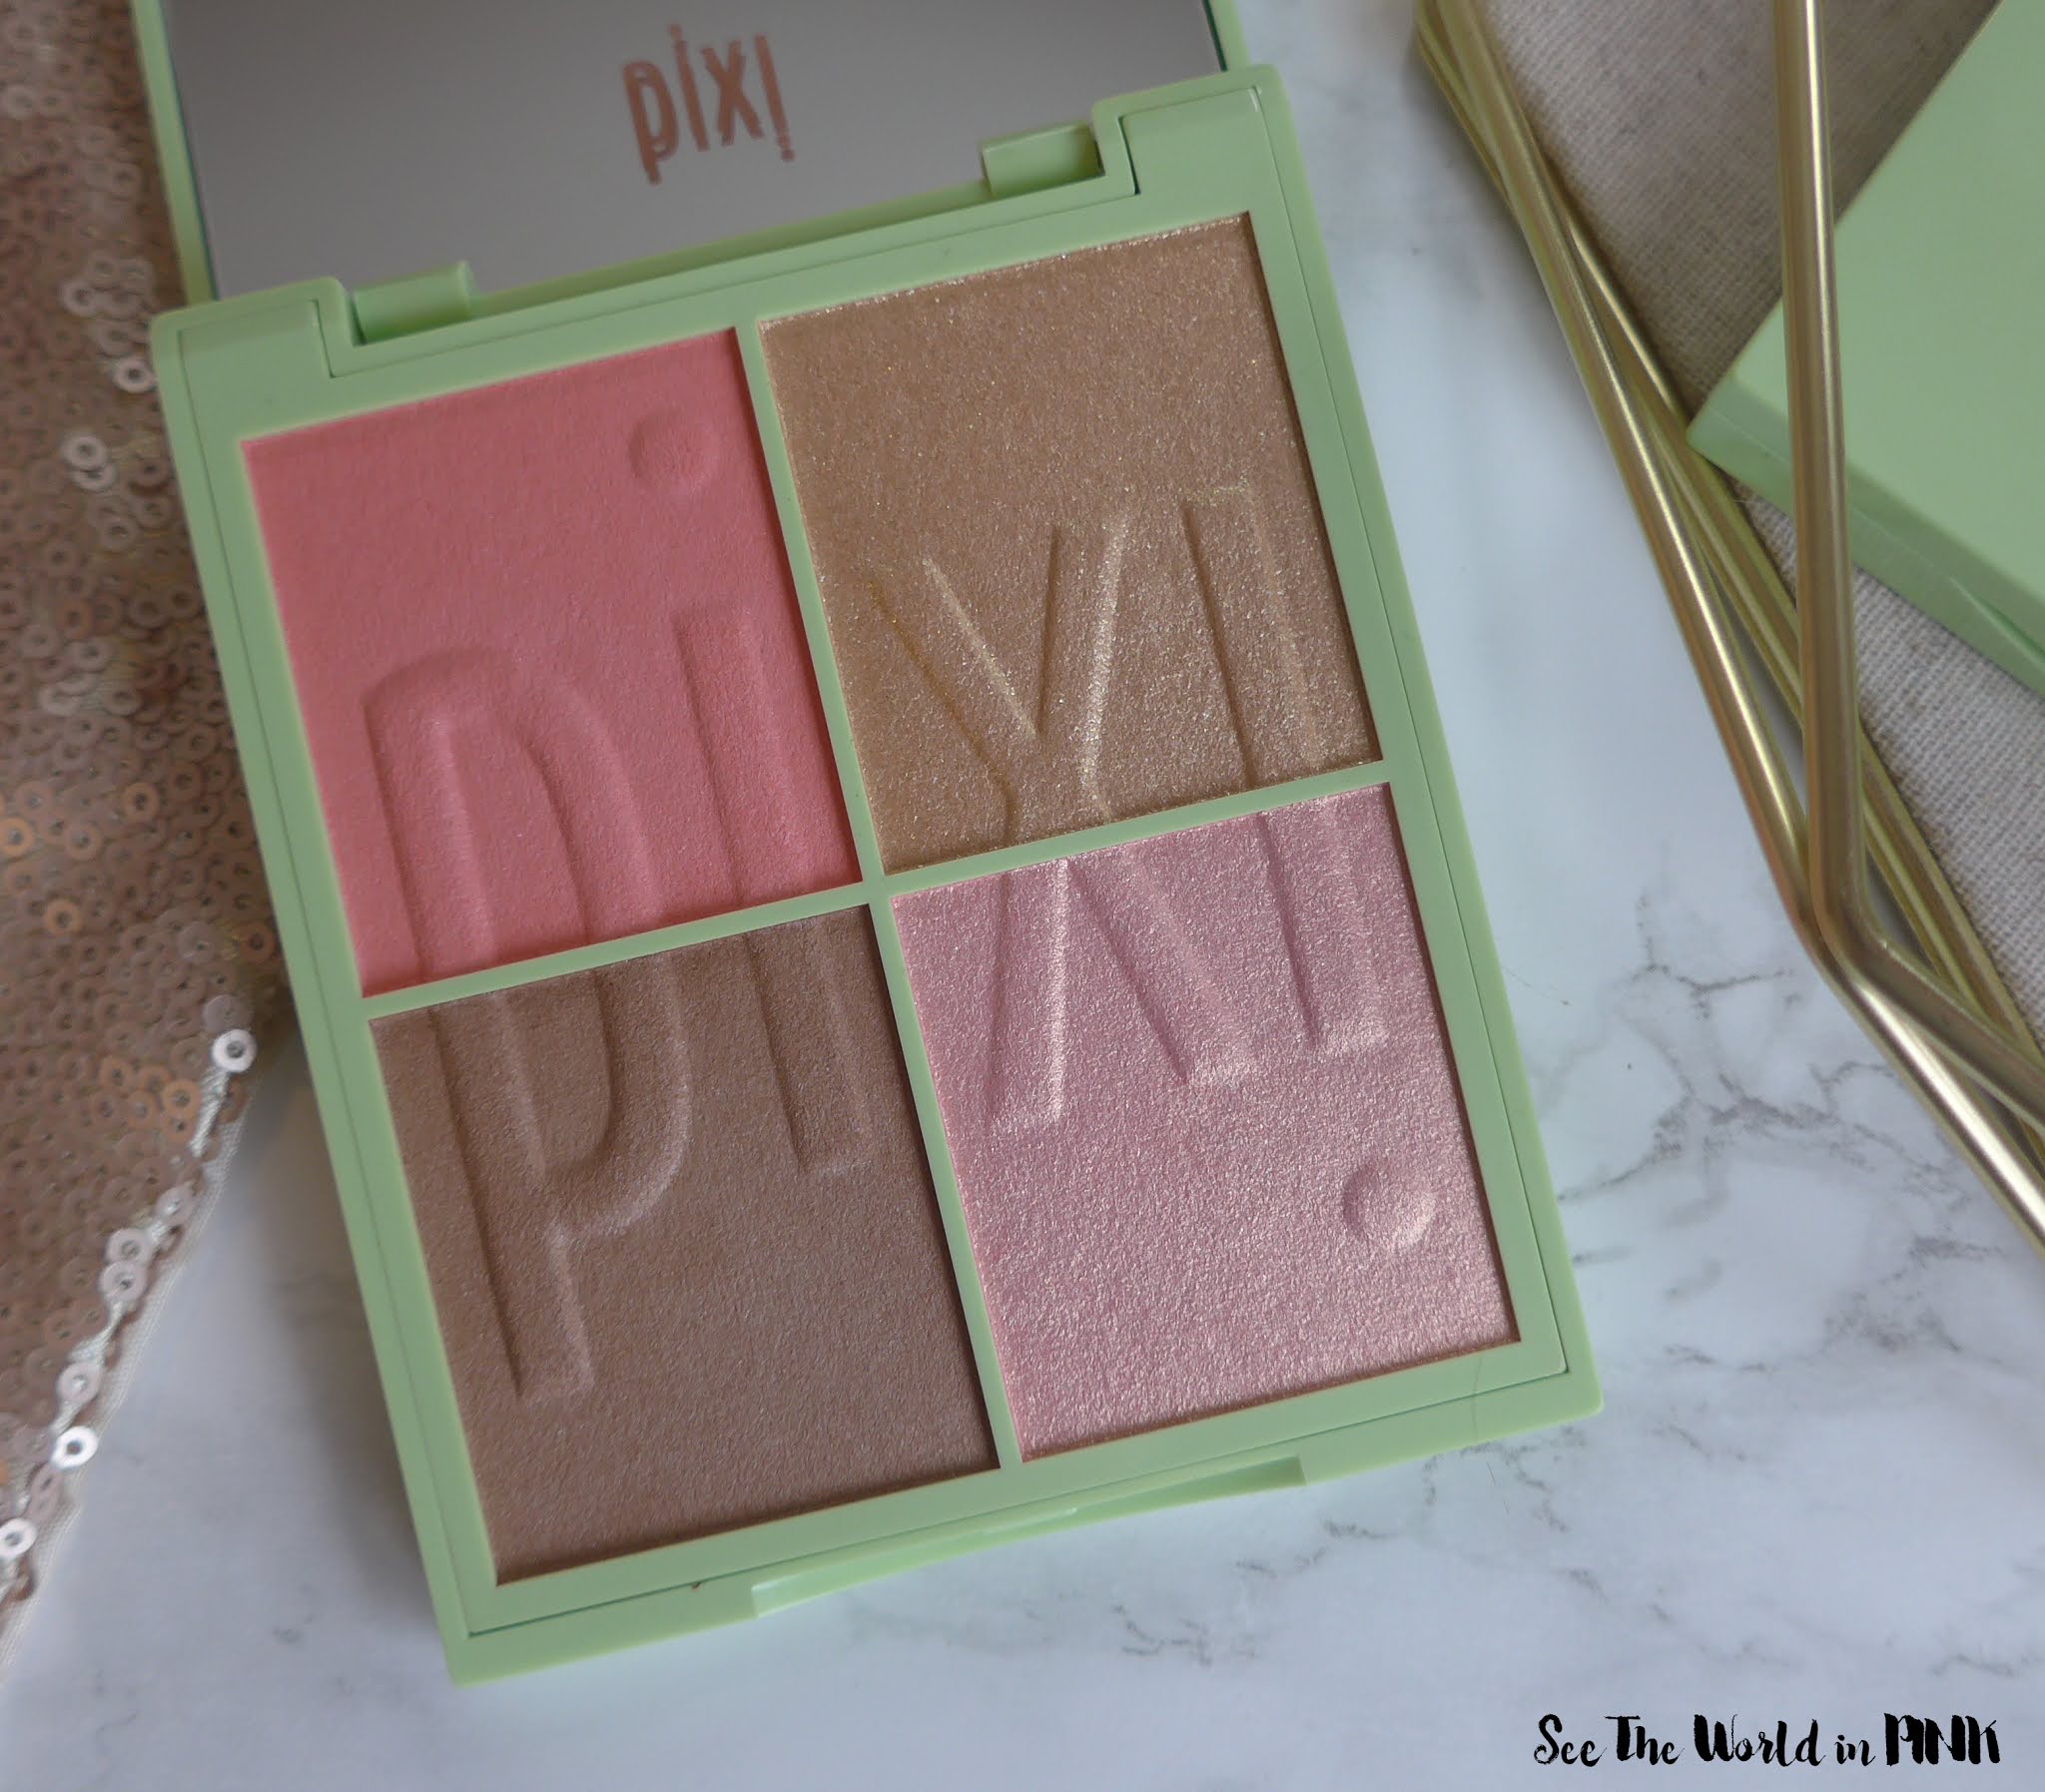 Pixi Beauty Eye Effects Shadow Palettes & Nuance Quartettes - Swatches, Try-ons & Thoughts